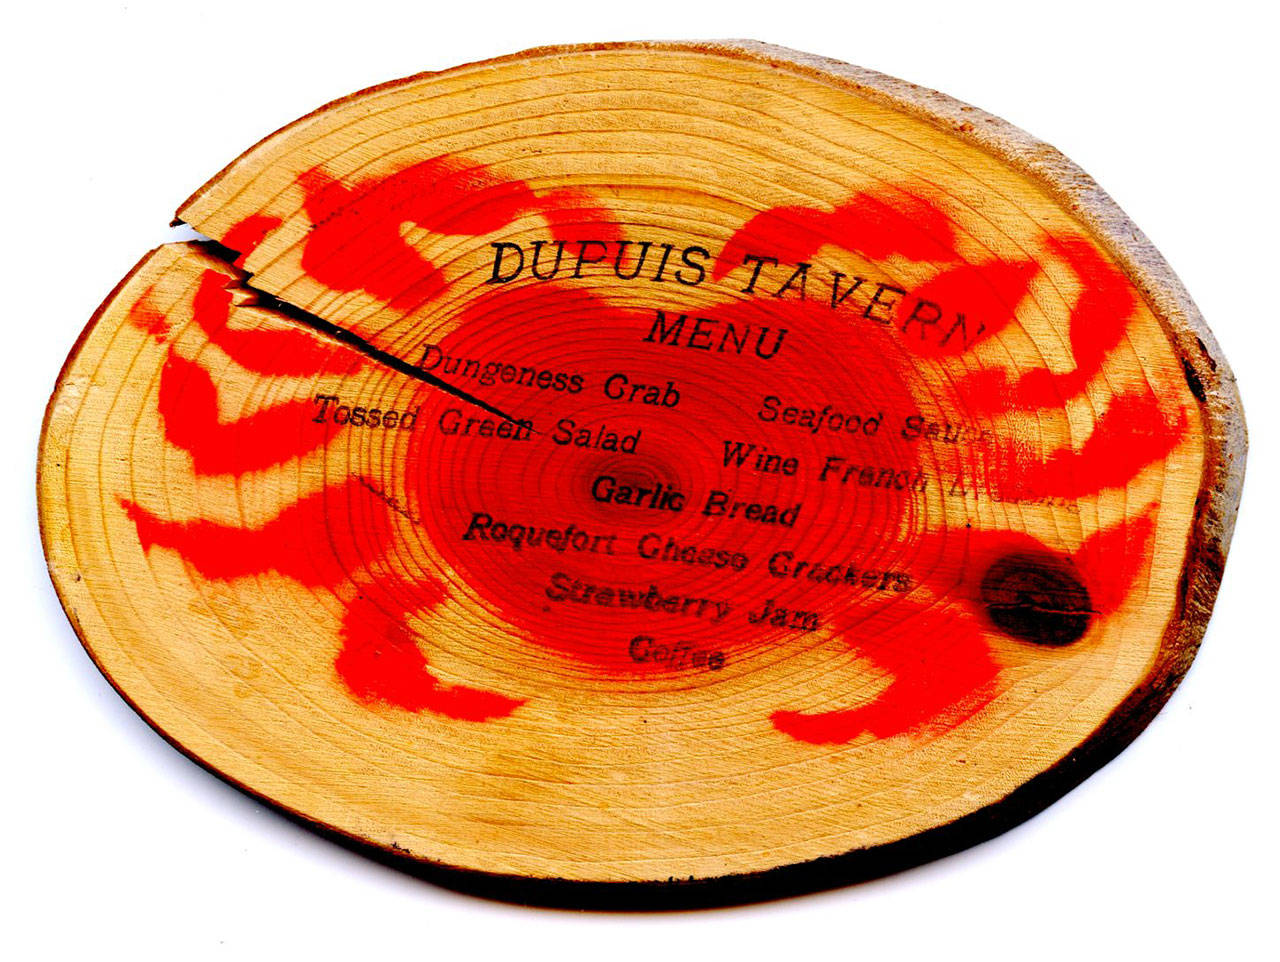 An old menu written on wood sliced from a tree limb. (Dupuis Restaurant collection)